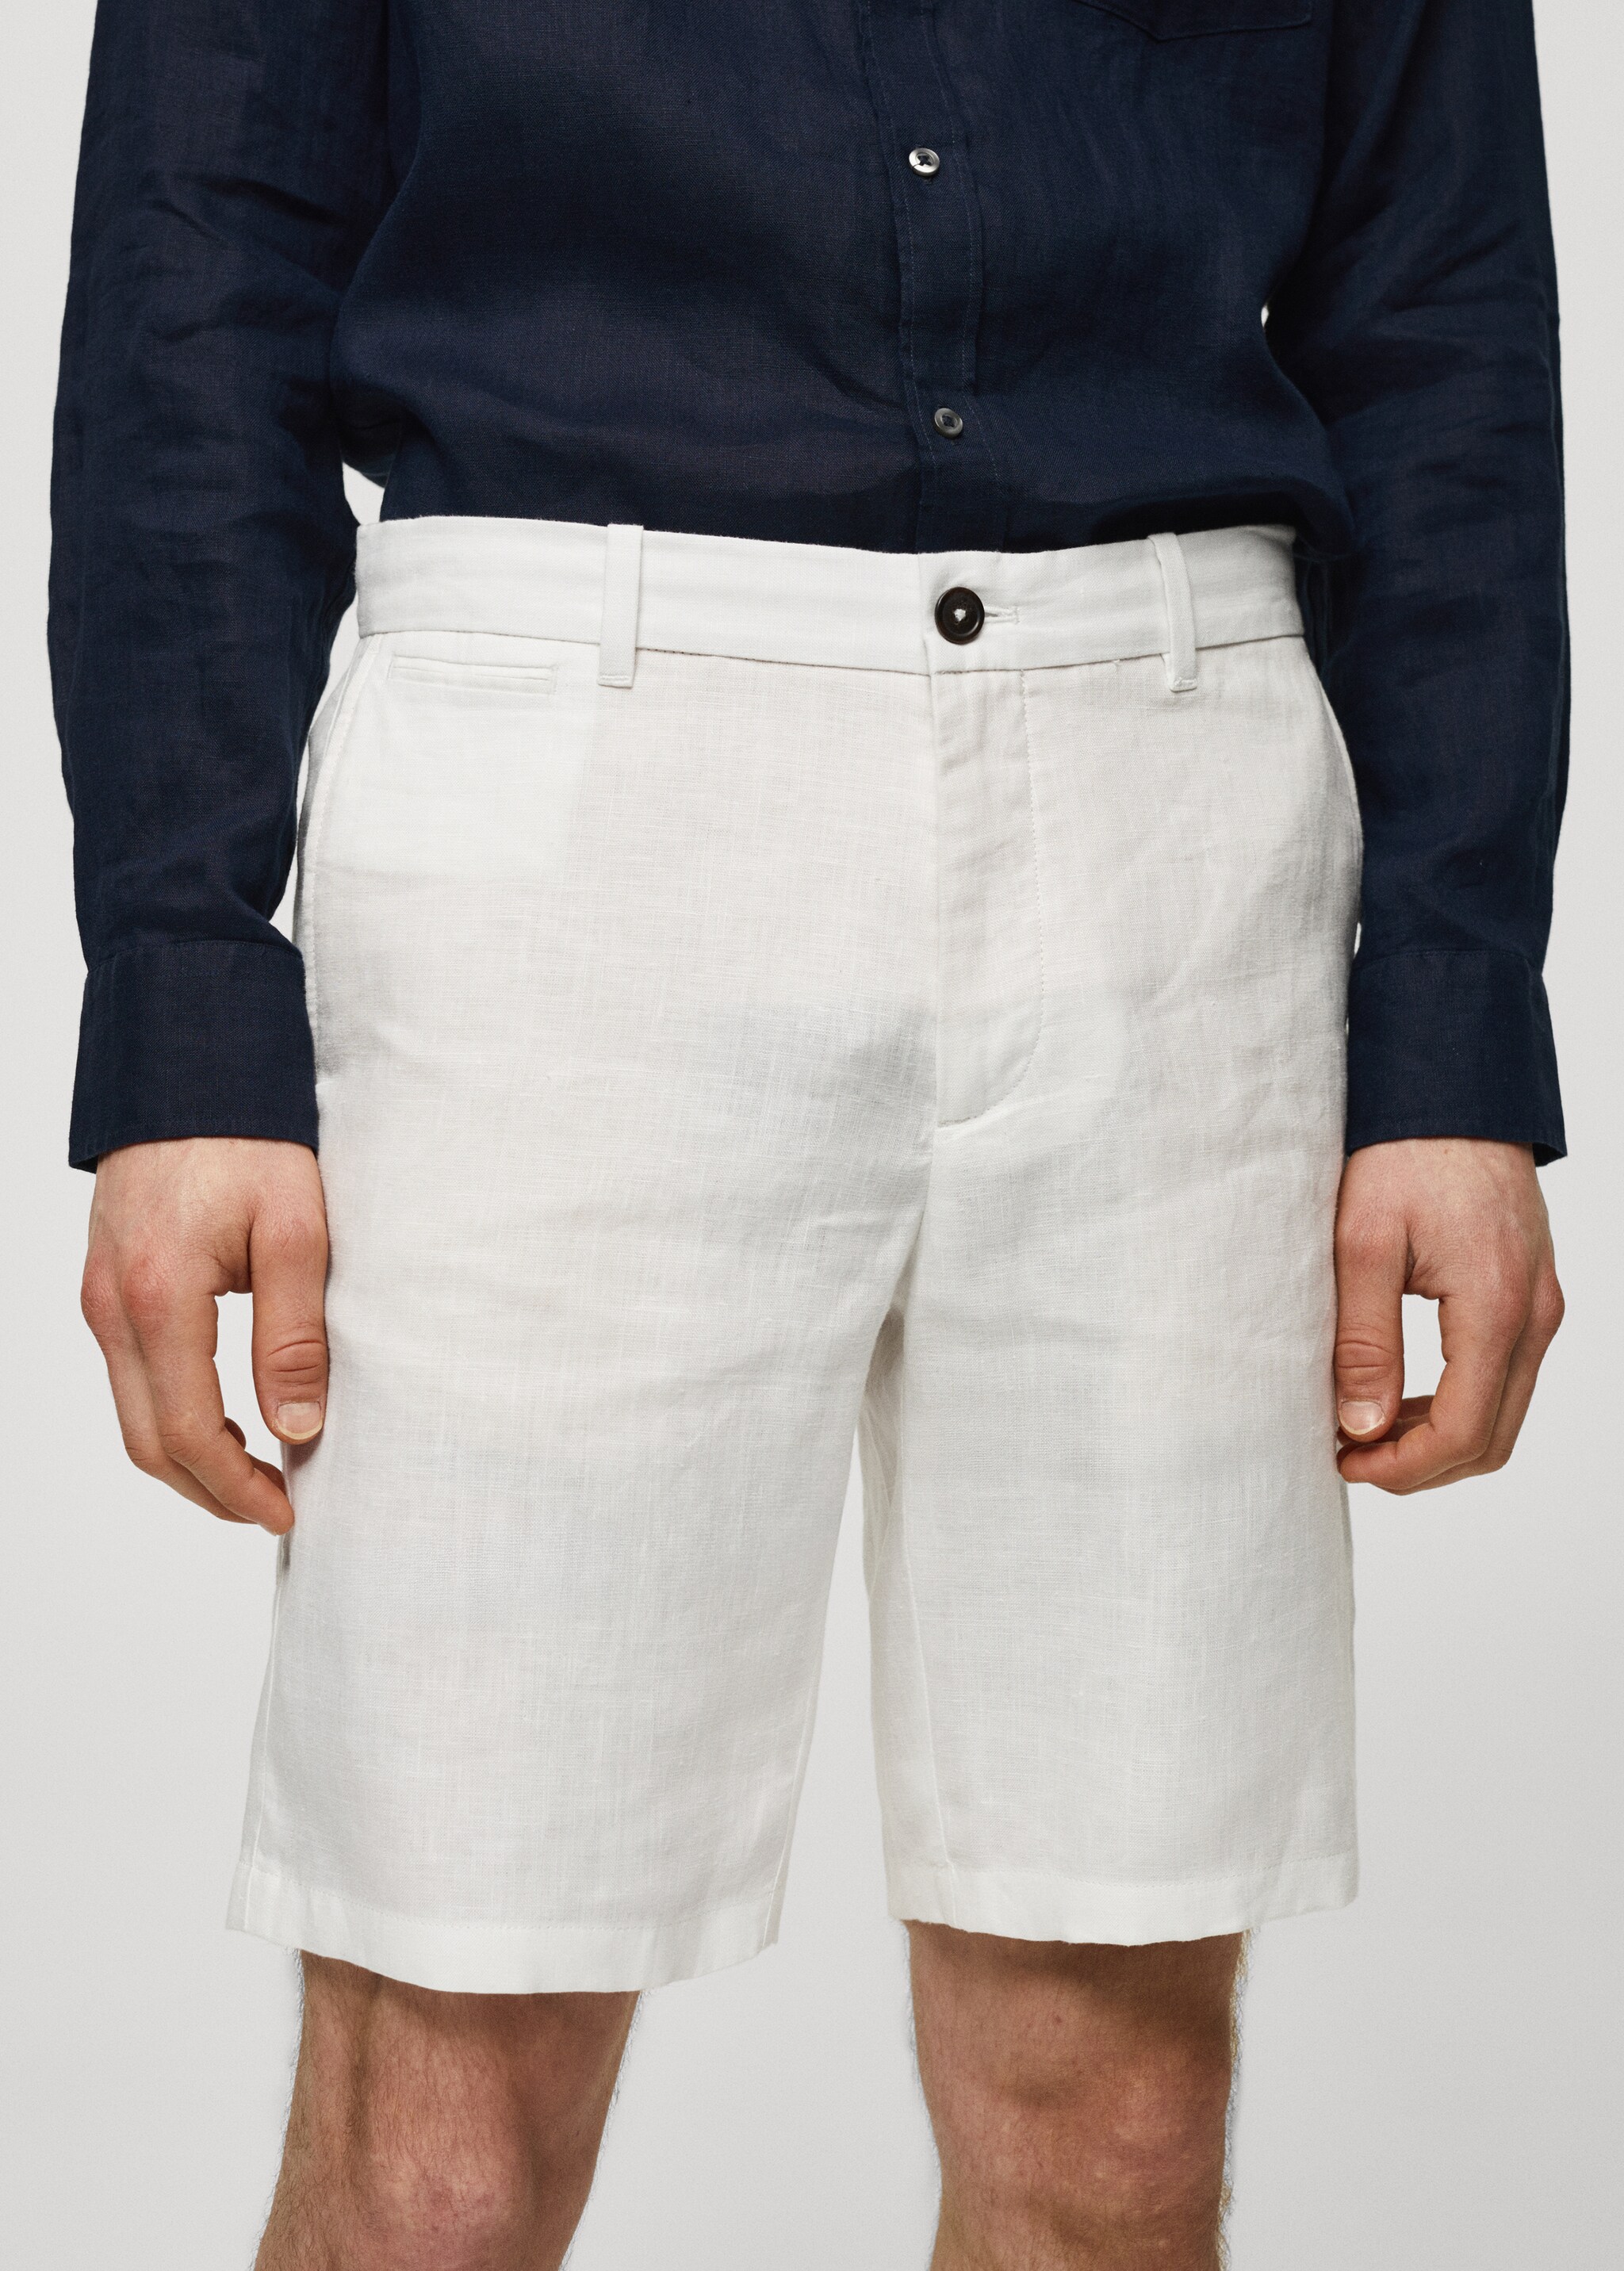 Slim fit 100% linen Bermuda shorts - Details of the article 1